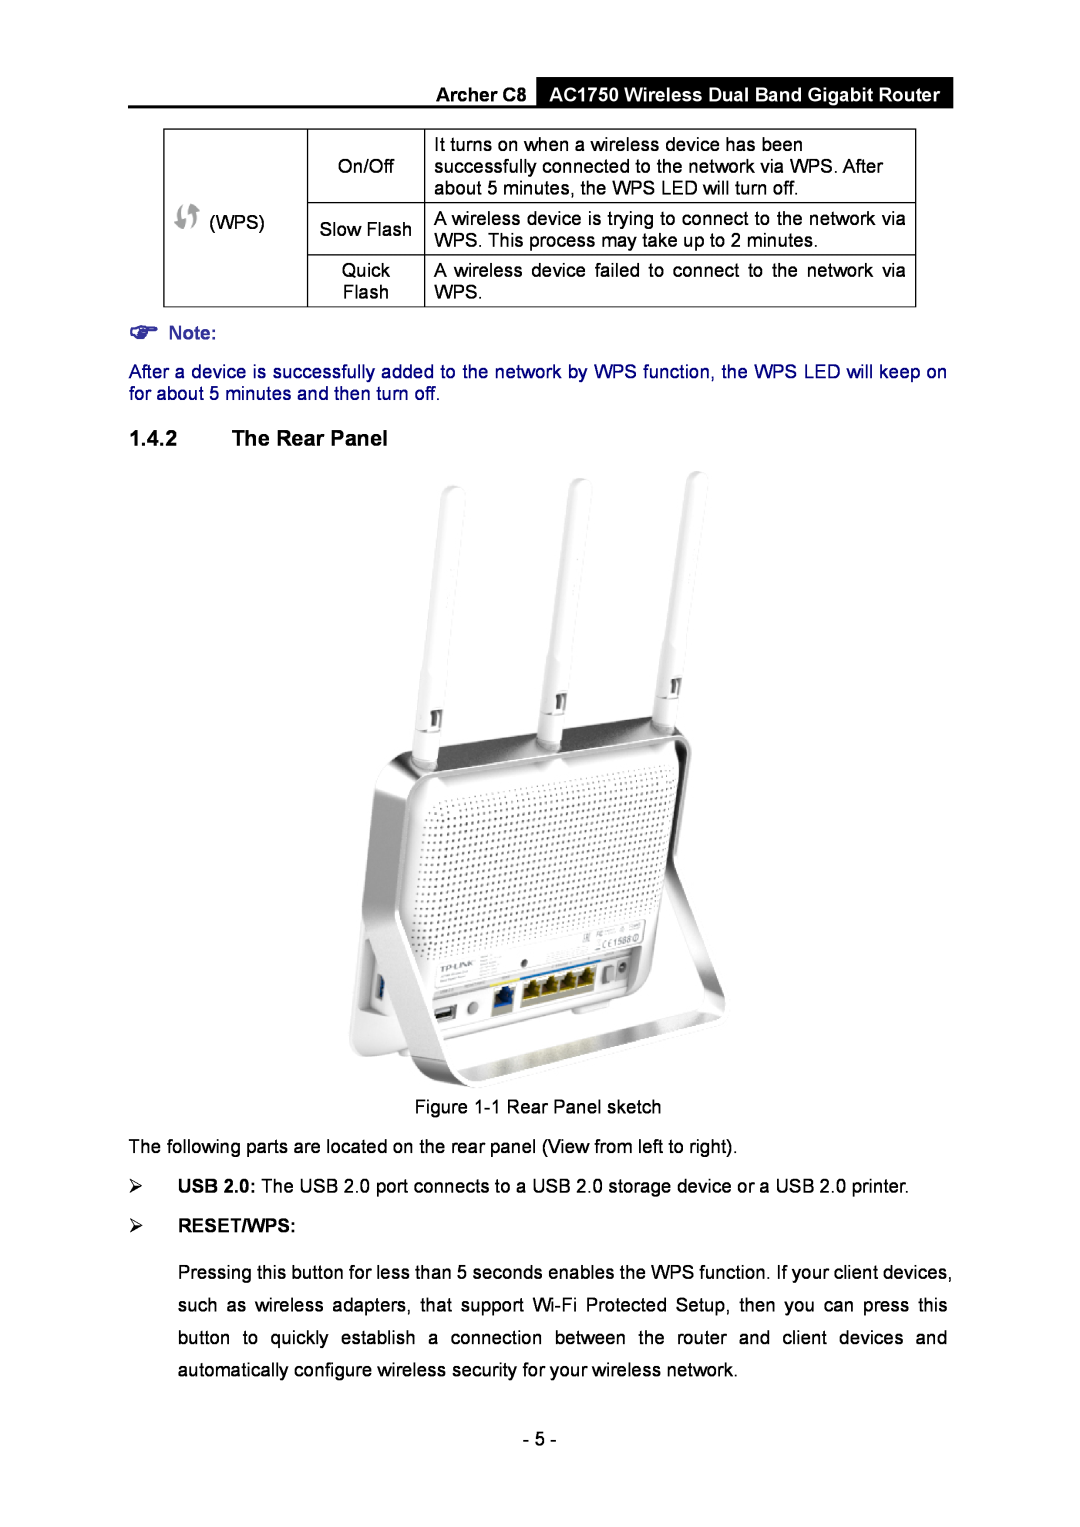 TP-Link manual The Rear Panel, Archer C8 AC1750 Wireless Dual Band Gigabit Router,  Note,  Reset/Wps 